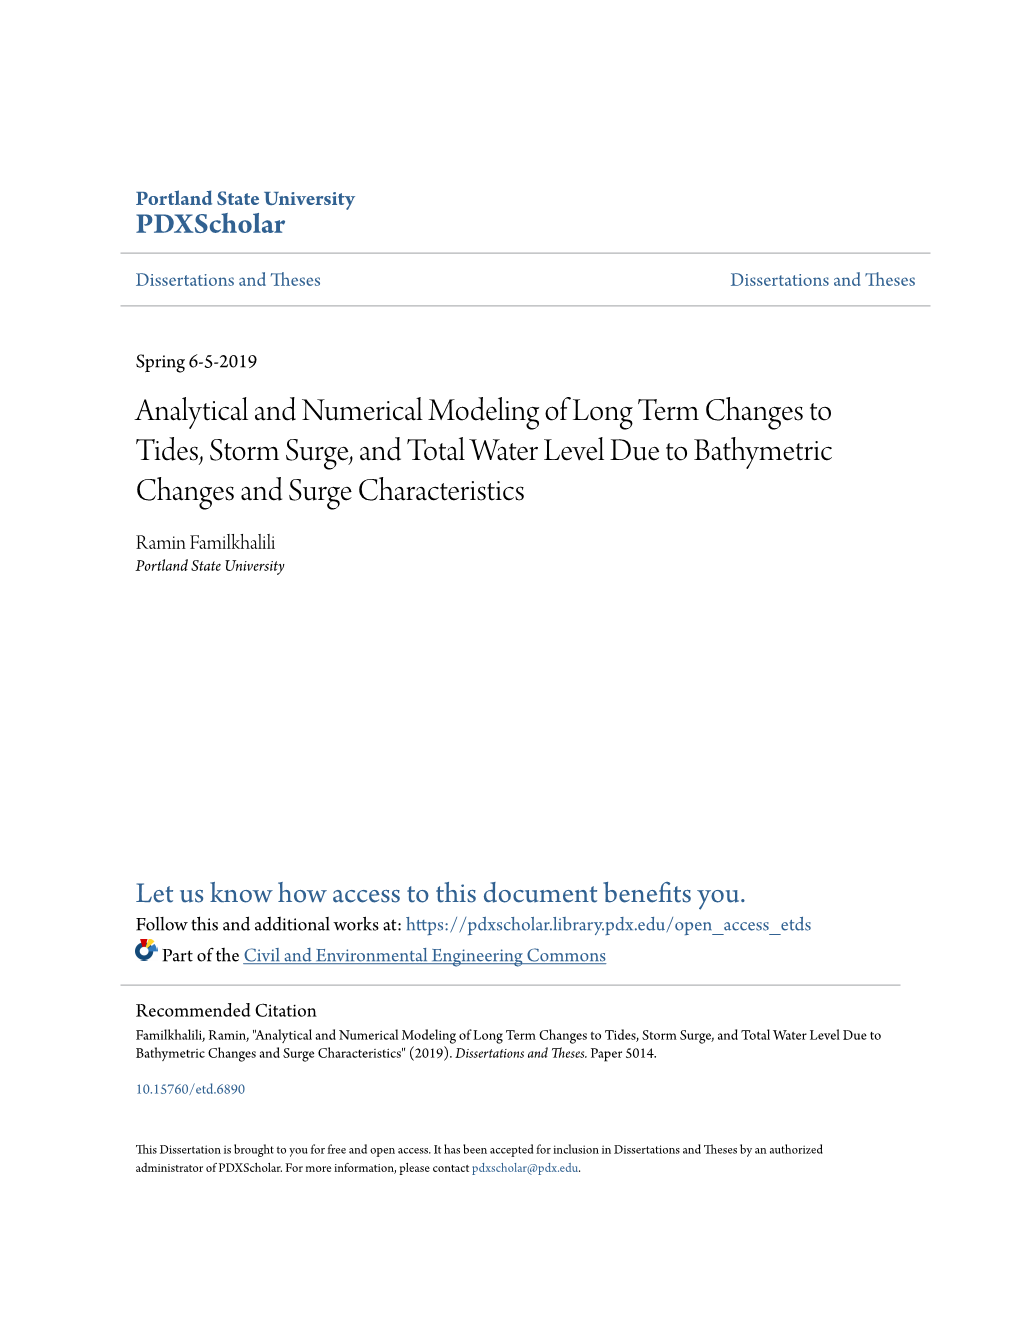 Analytical and Numerical Modeling of Long Term Changes to Tides, Storm Surge, and Total Water Level Due to Bathymetric Changes and Surge Characteristics